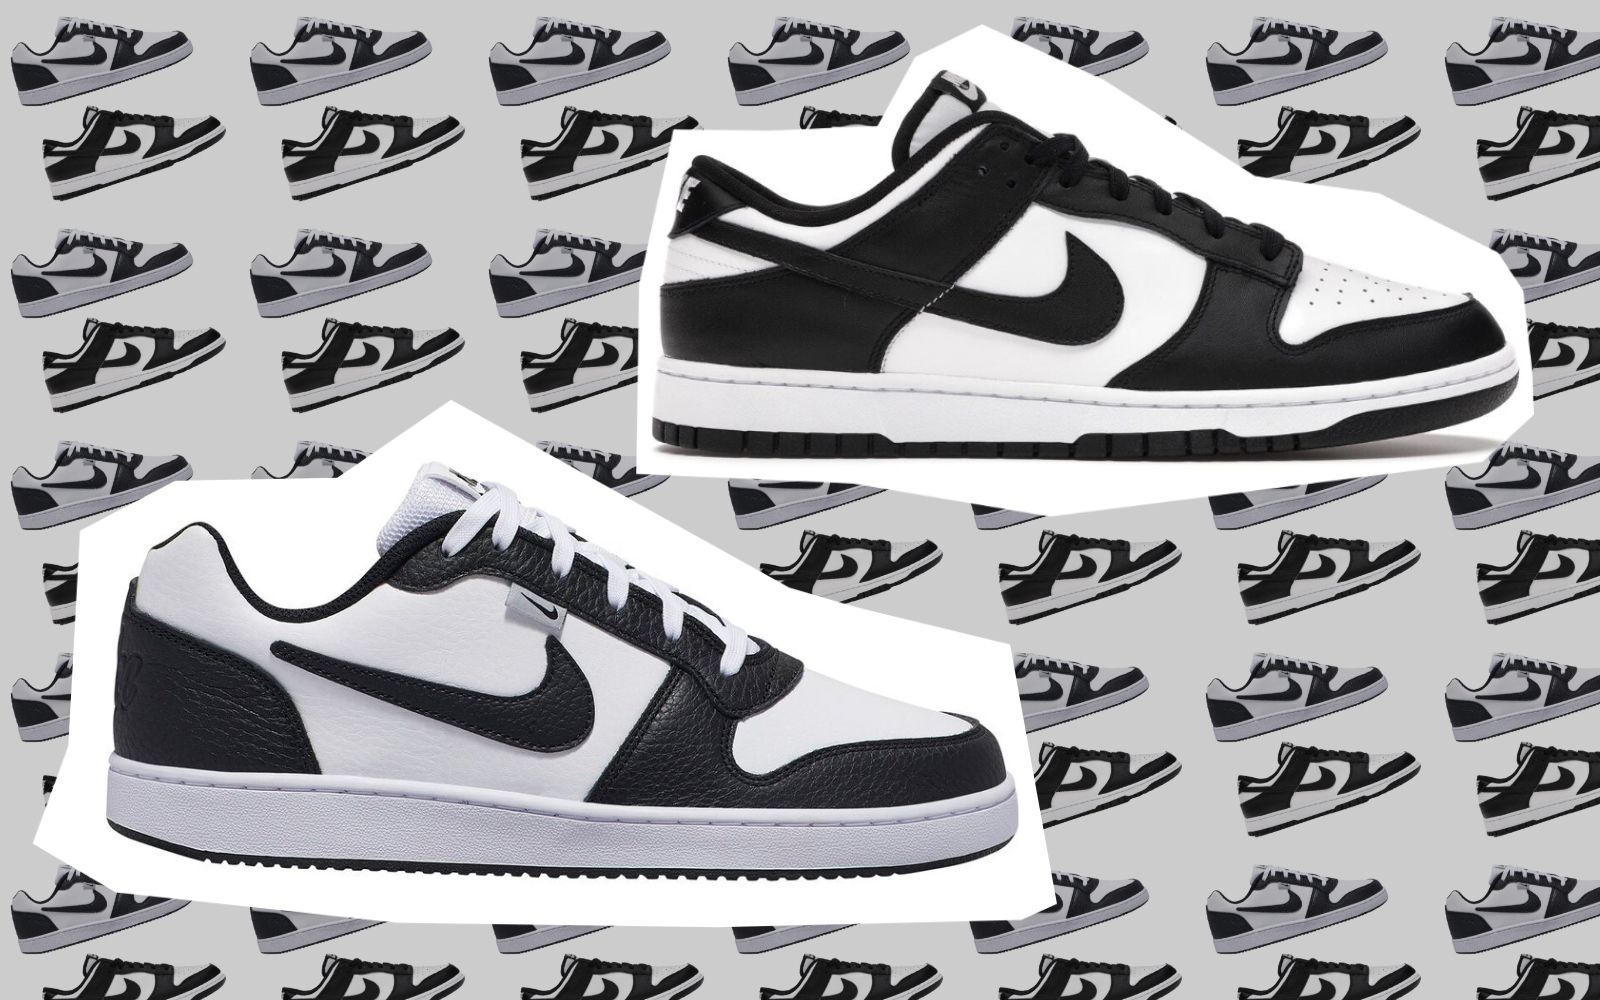 These Nikes Dunks but they look a lot like